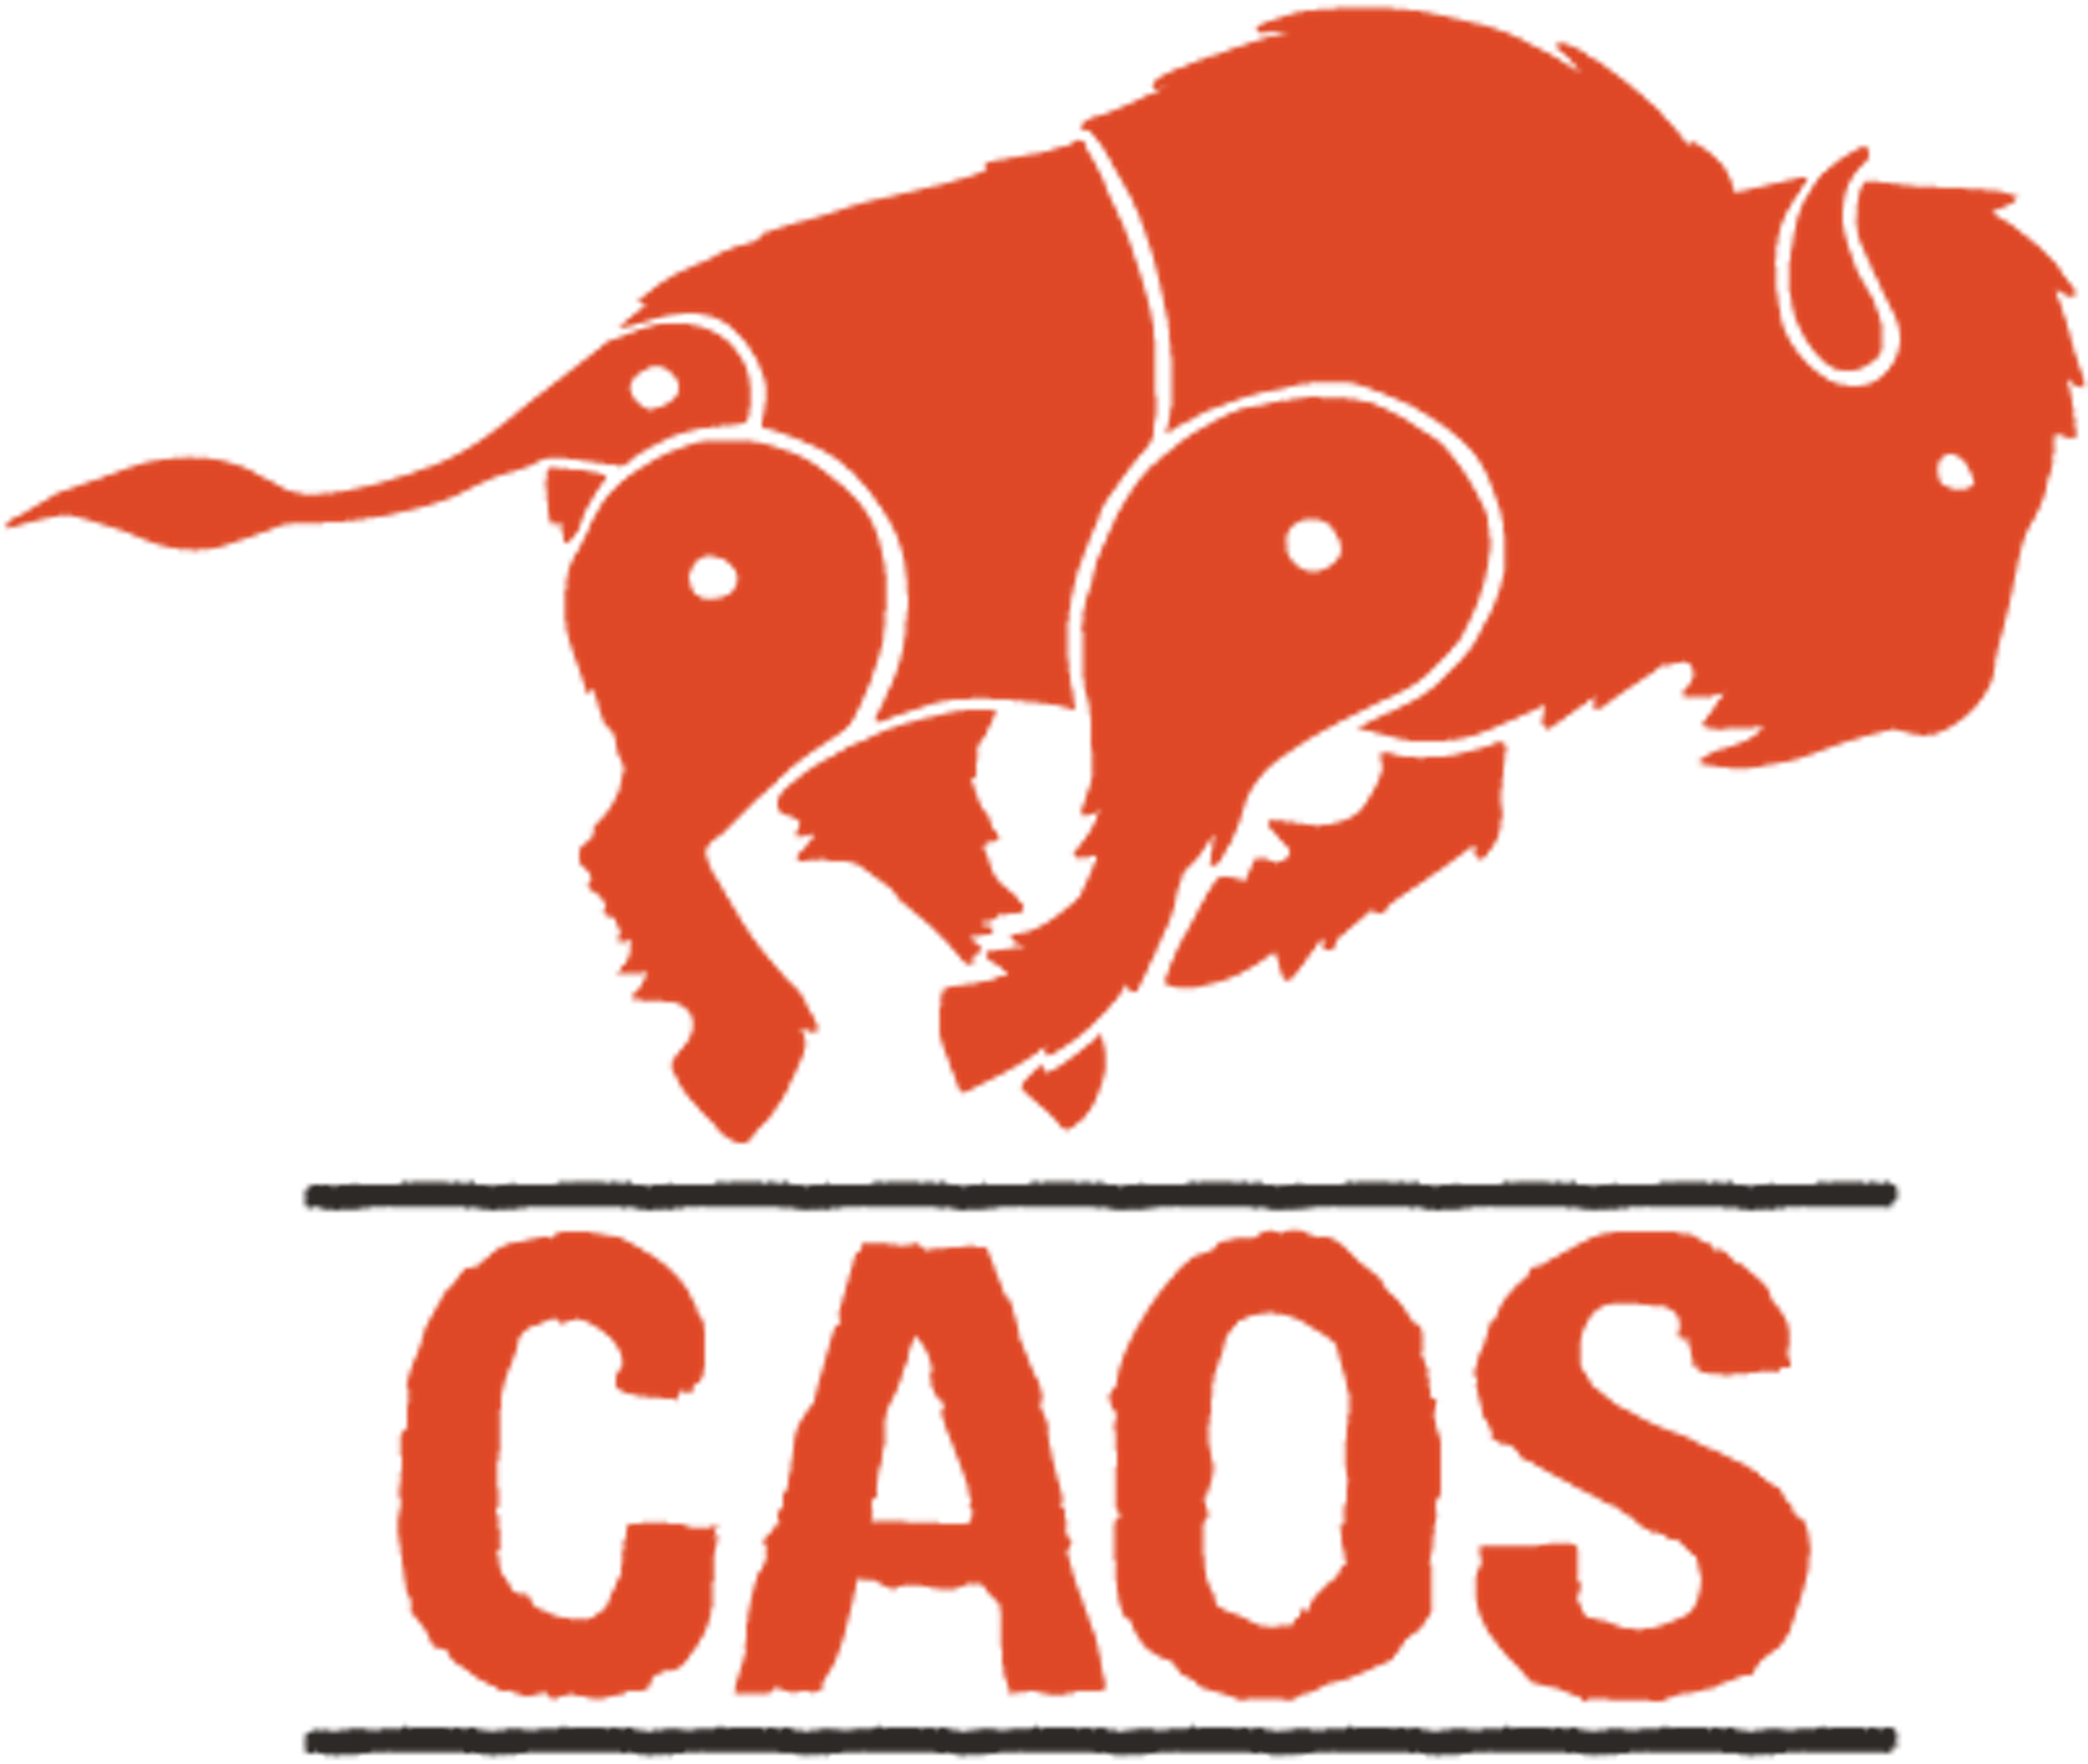 CAOS logo - an image of an orange buffalo with hinges on its joints running above the letters CAOS